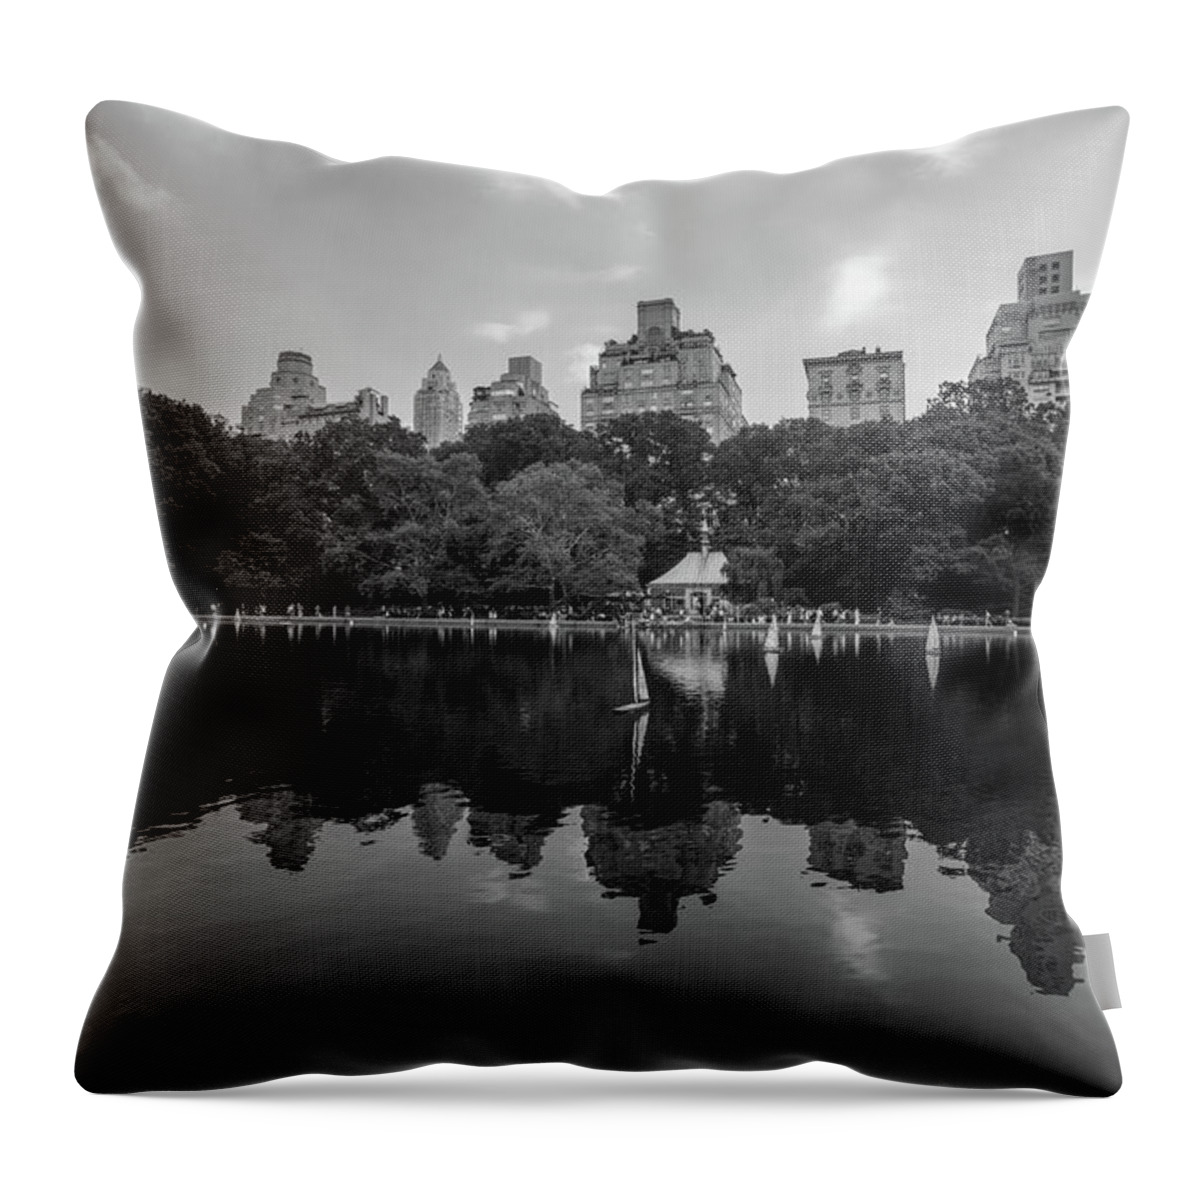 B&w Throw Pillow featuring the photograph Central Park Sail Boats by John McGraw